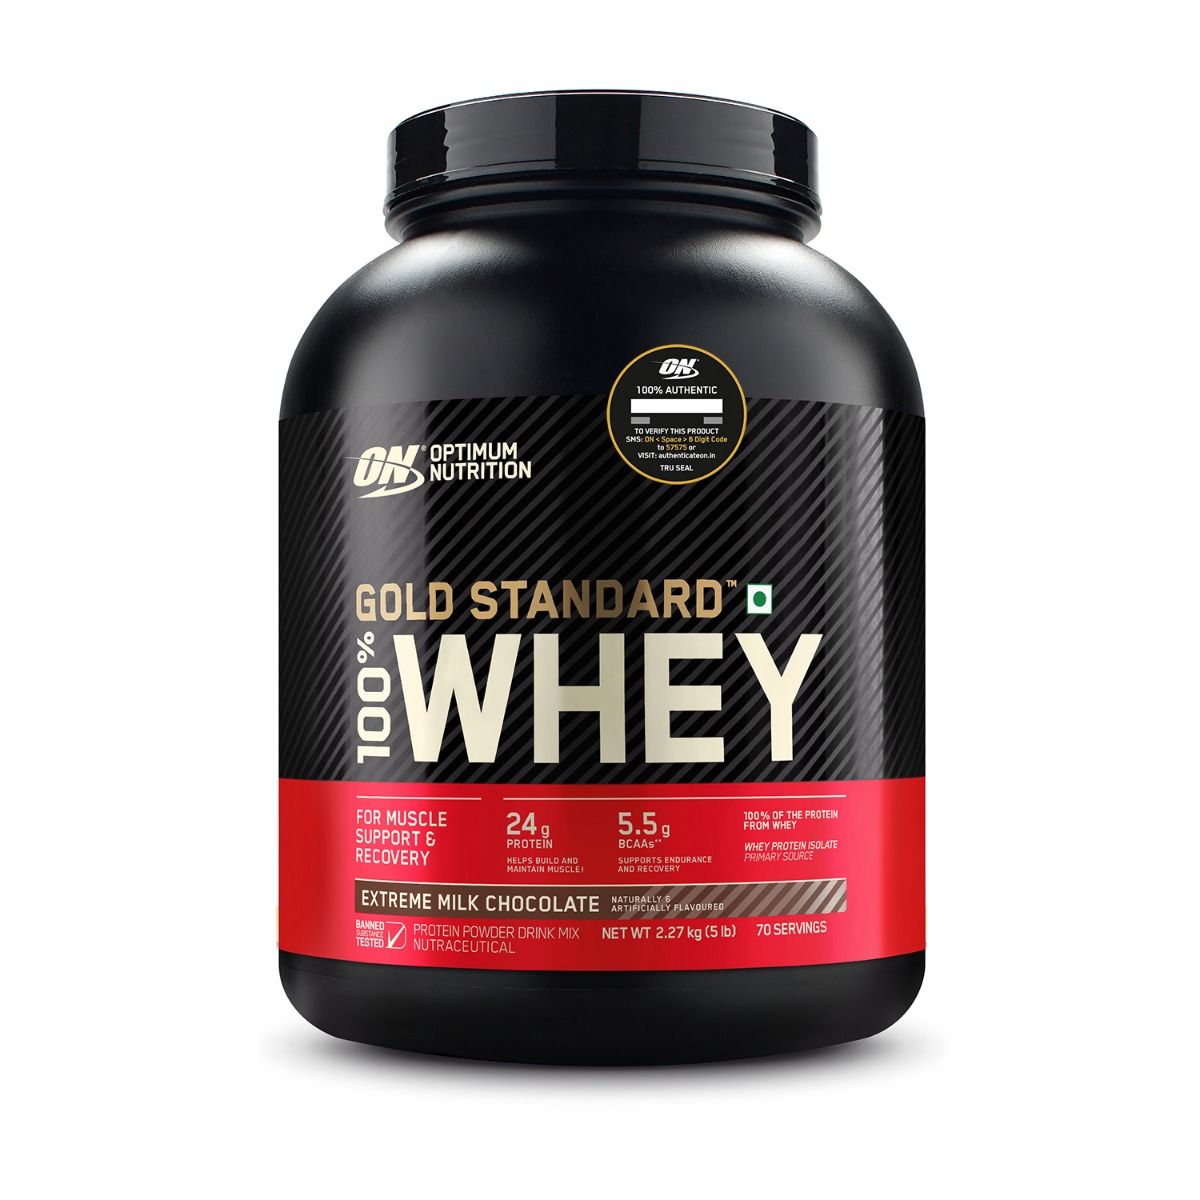 Optimum Nutrition (ON) Gold Standard 100% Whey Protein Extreme Milk Chocolate Flavour Powder, 5 lb, Pack of 1 